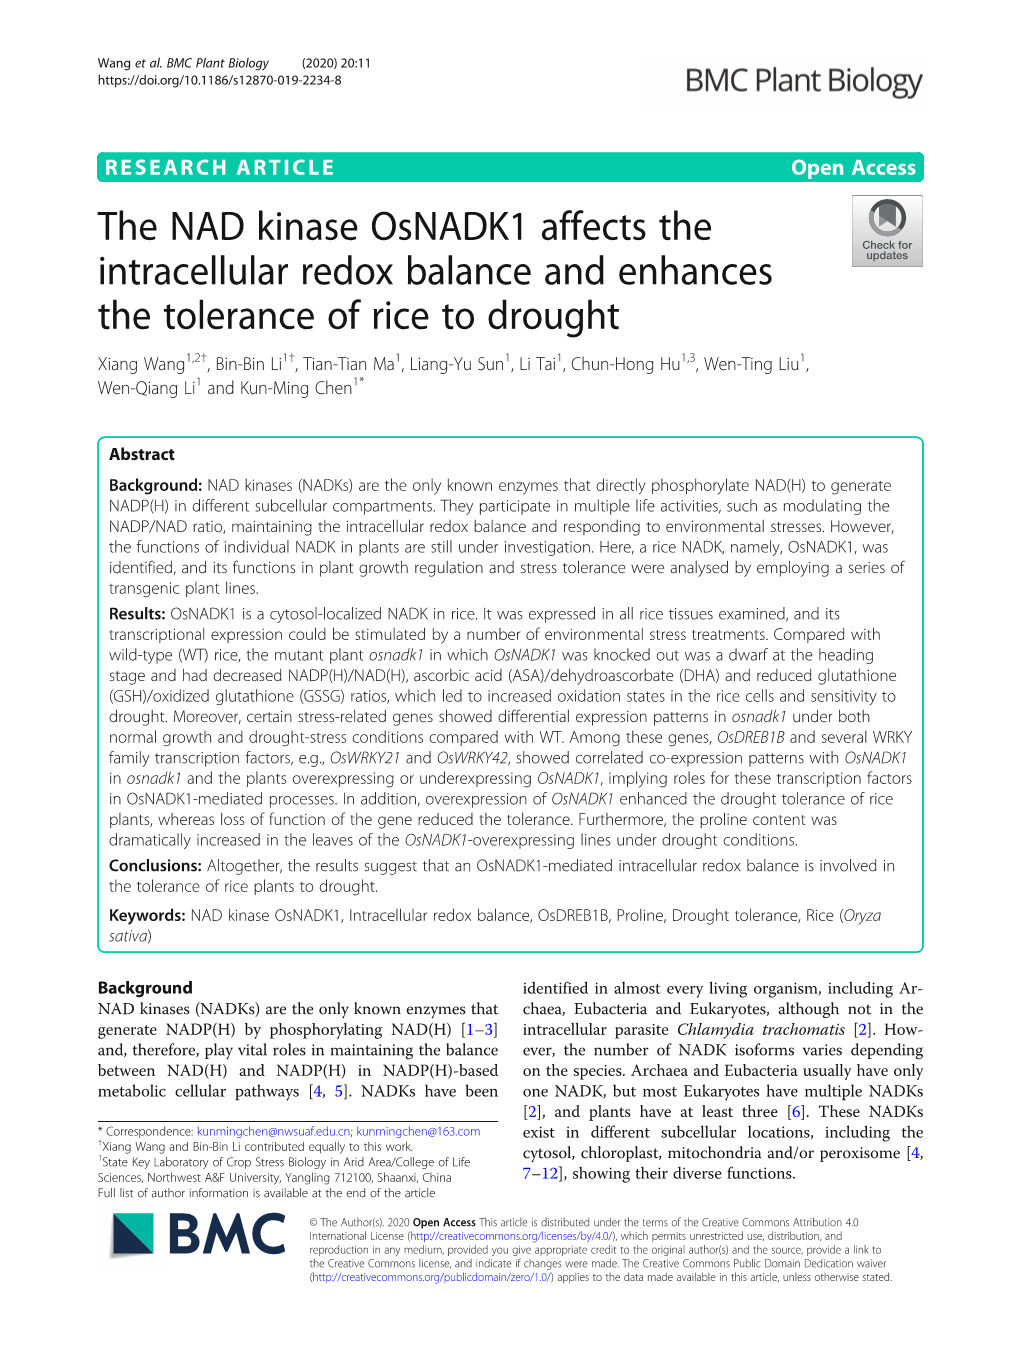 The NAD Kinase Osnadk1 Affects the Intracellular Redox Balance And